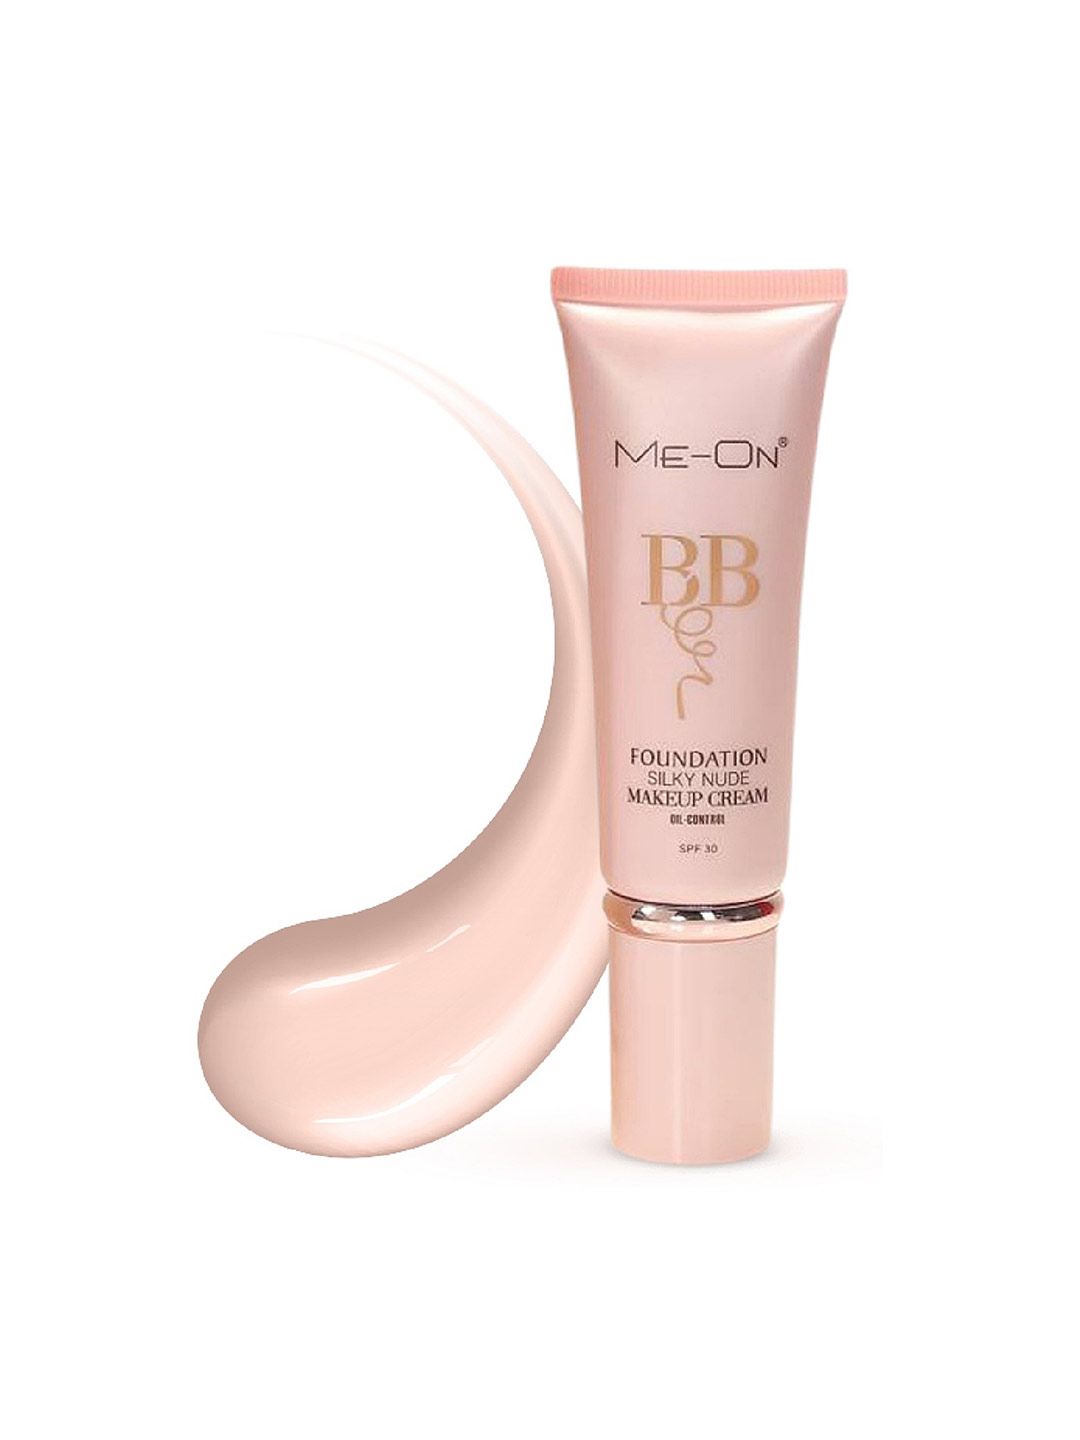 ME-ON BB Cream Foundation Oil Control - Shade 02 Marble Price in India